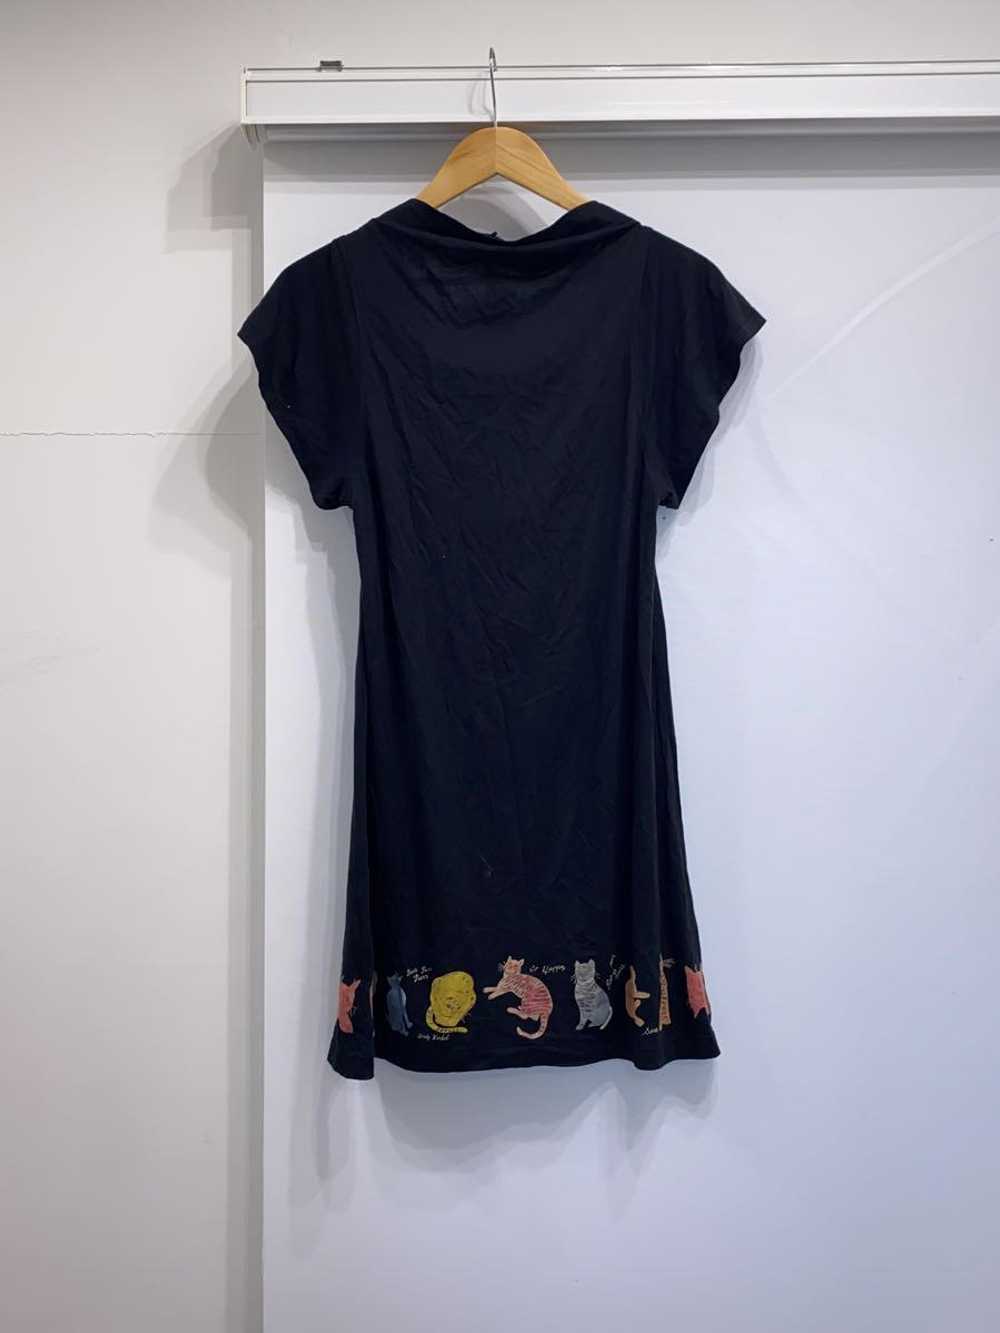 Used Hysteric Glamor T-Shirt/Free/Cotton/Blk/6C0-… - image 2